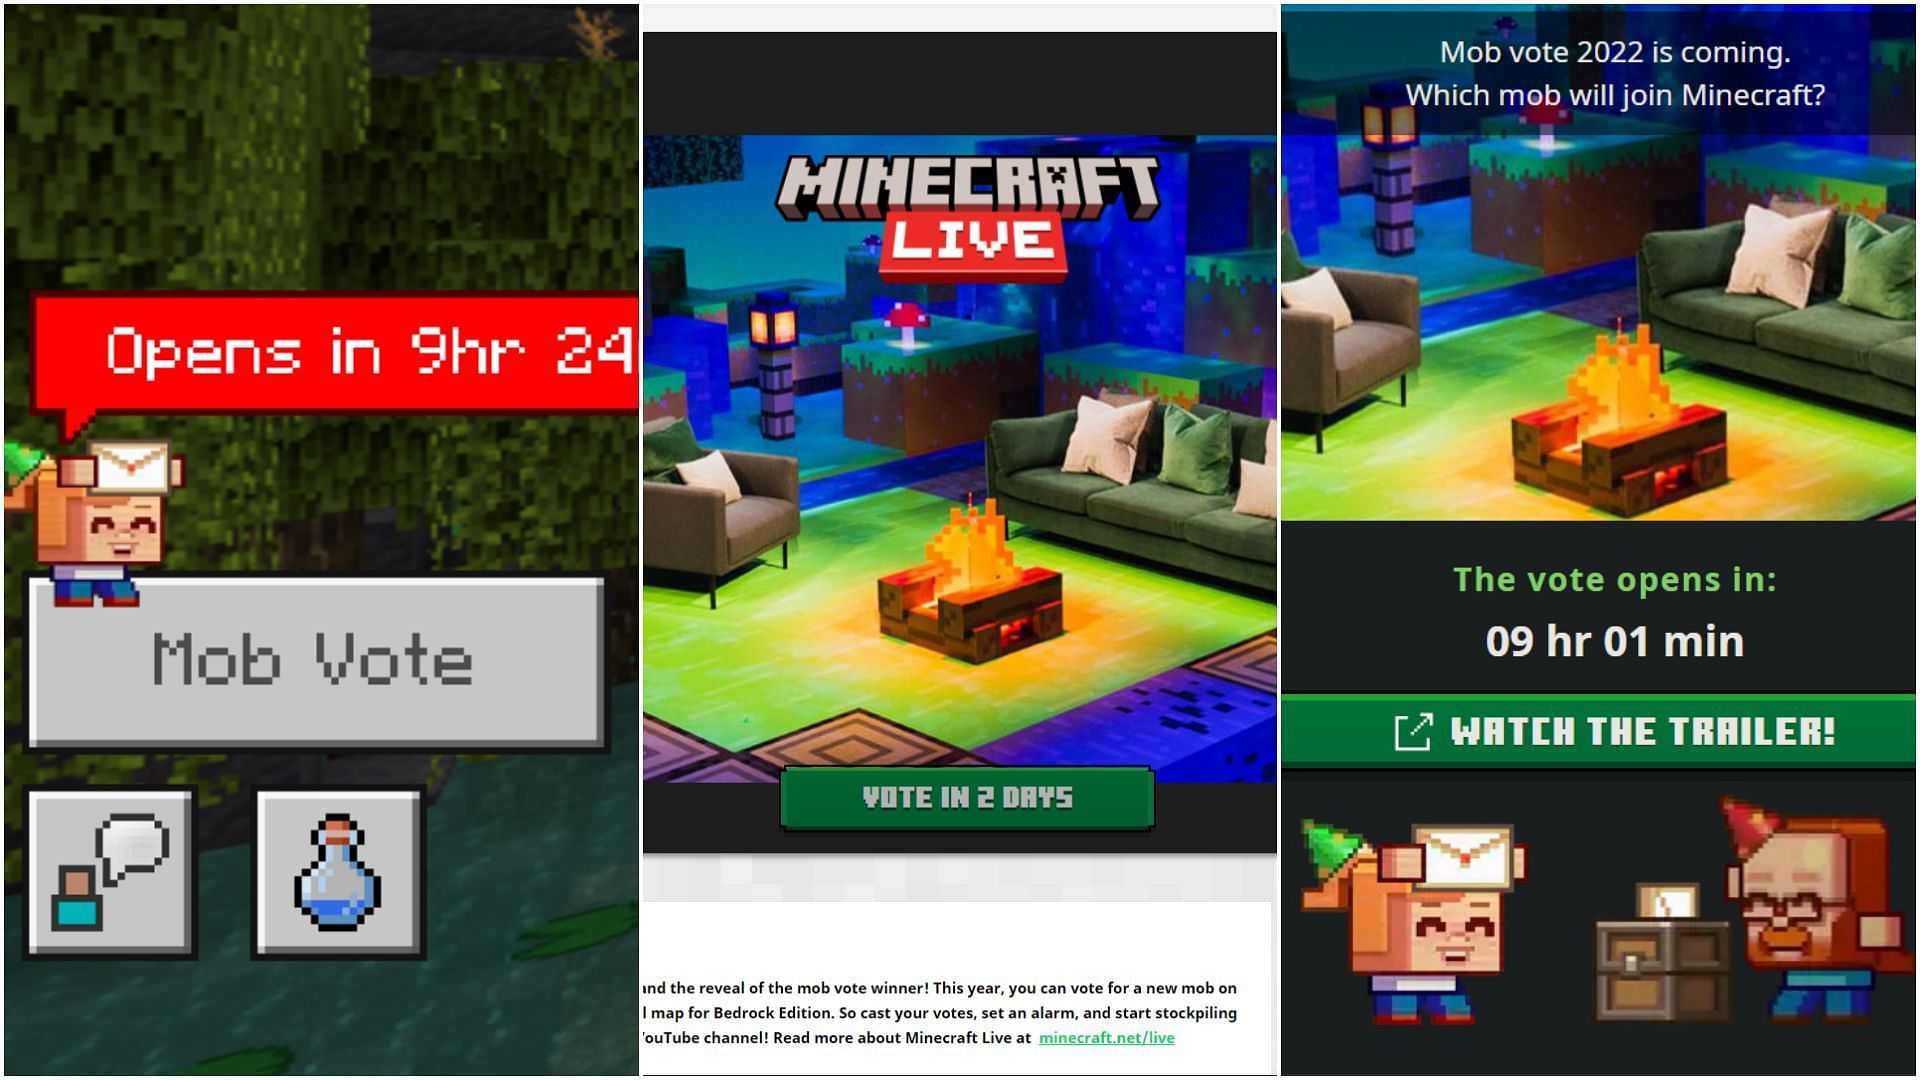 Minecraft Live 2022 mob vote When and how to cast your vote